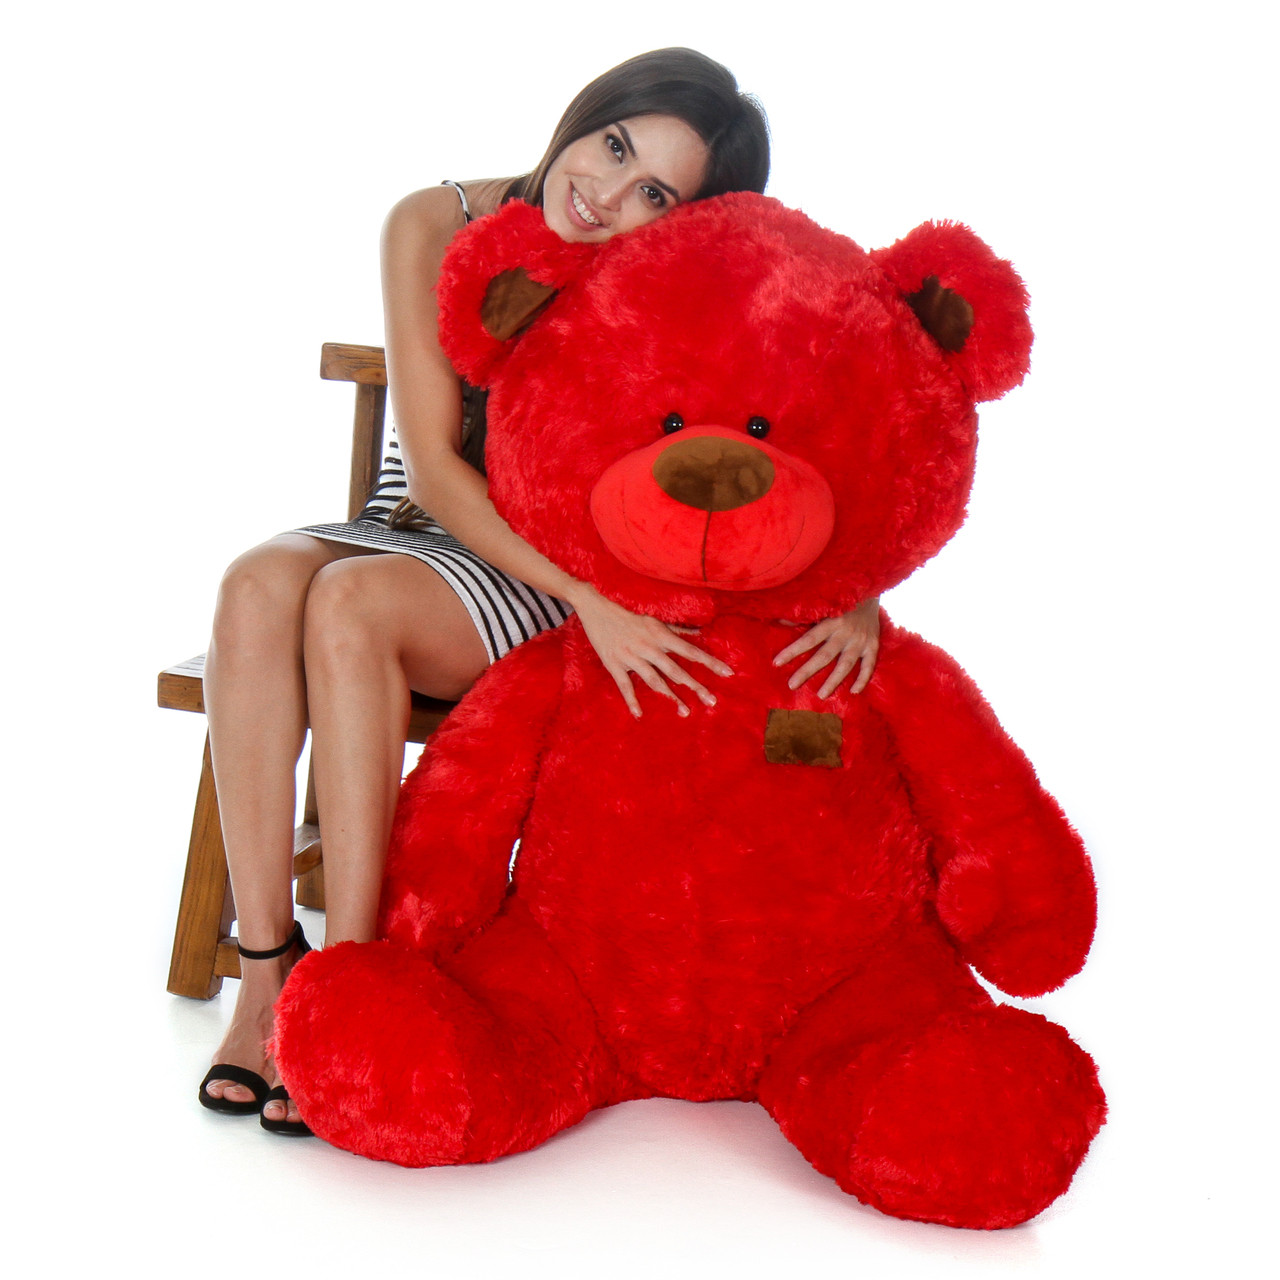 Huge Red Teddy Bear in Sitting Position by Giant Teddy Brand